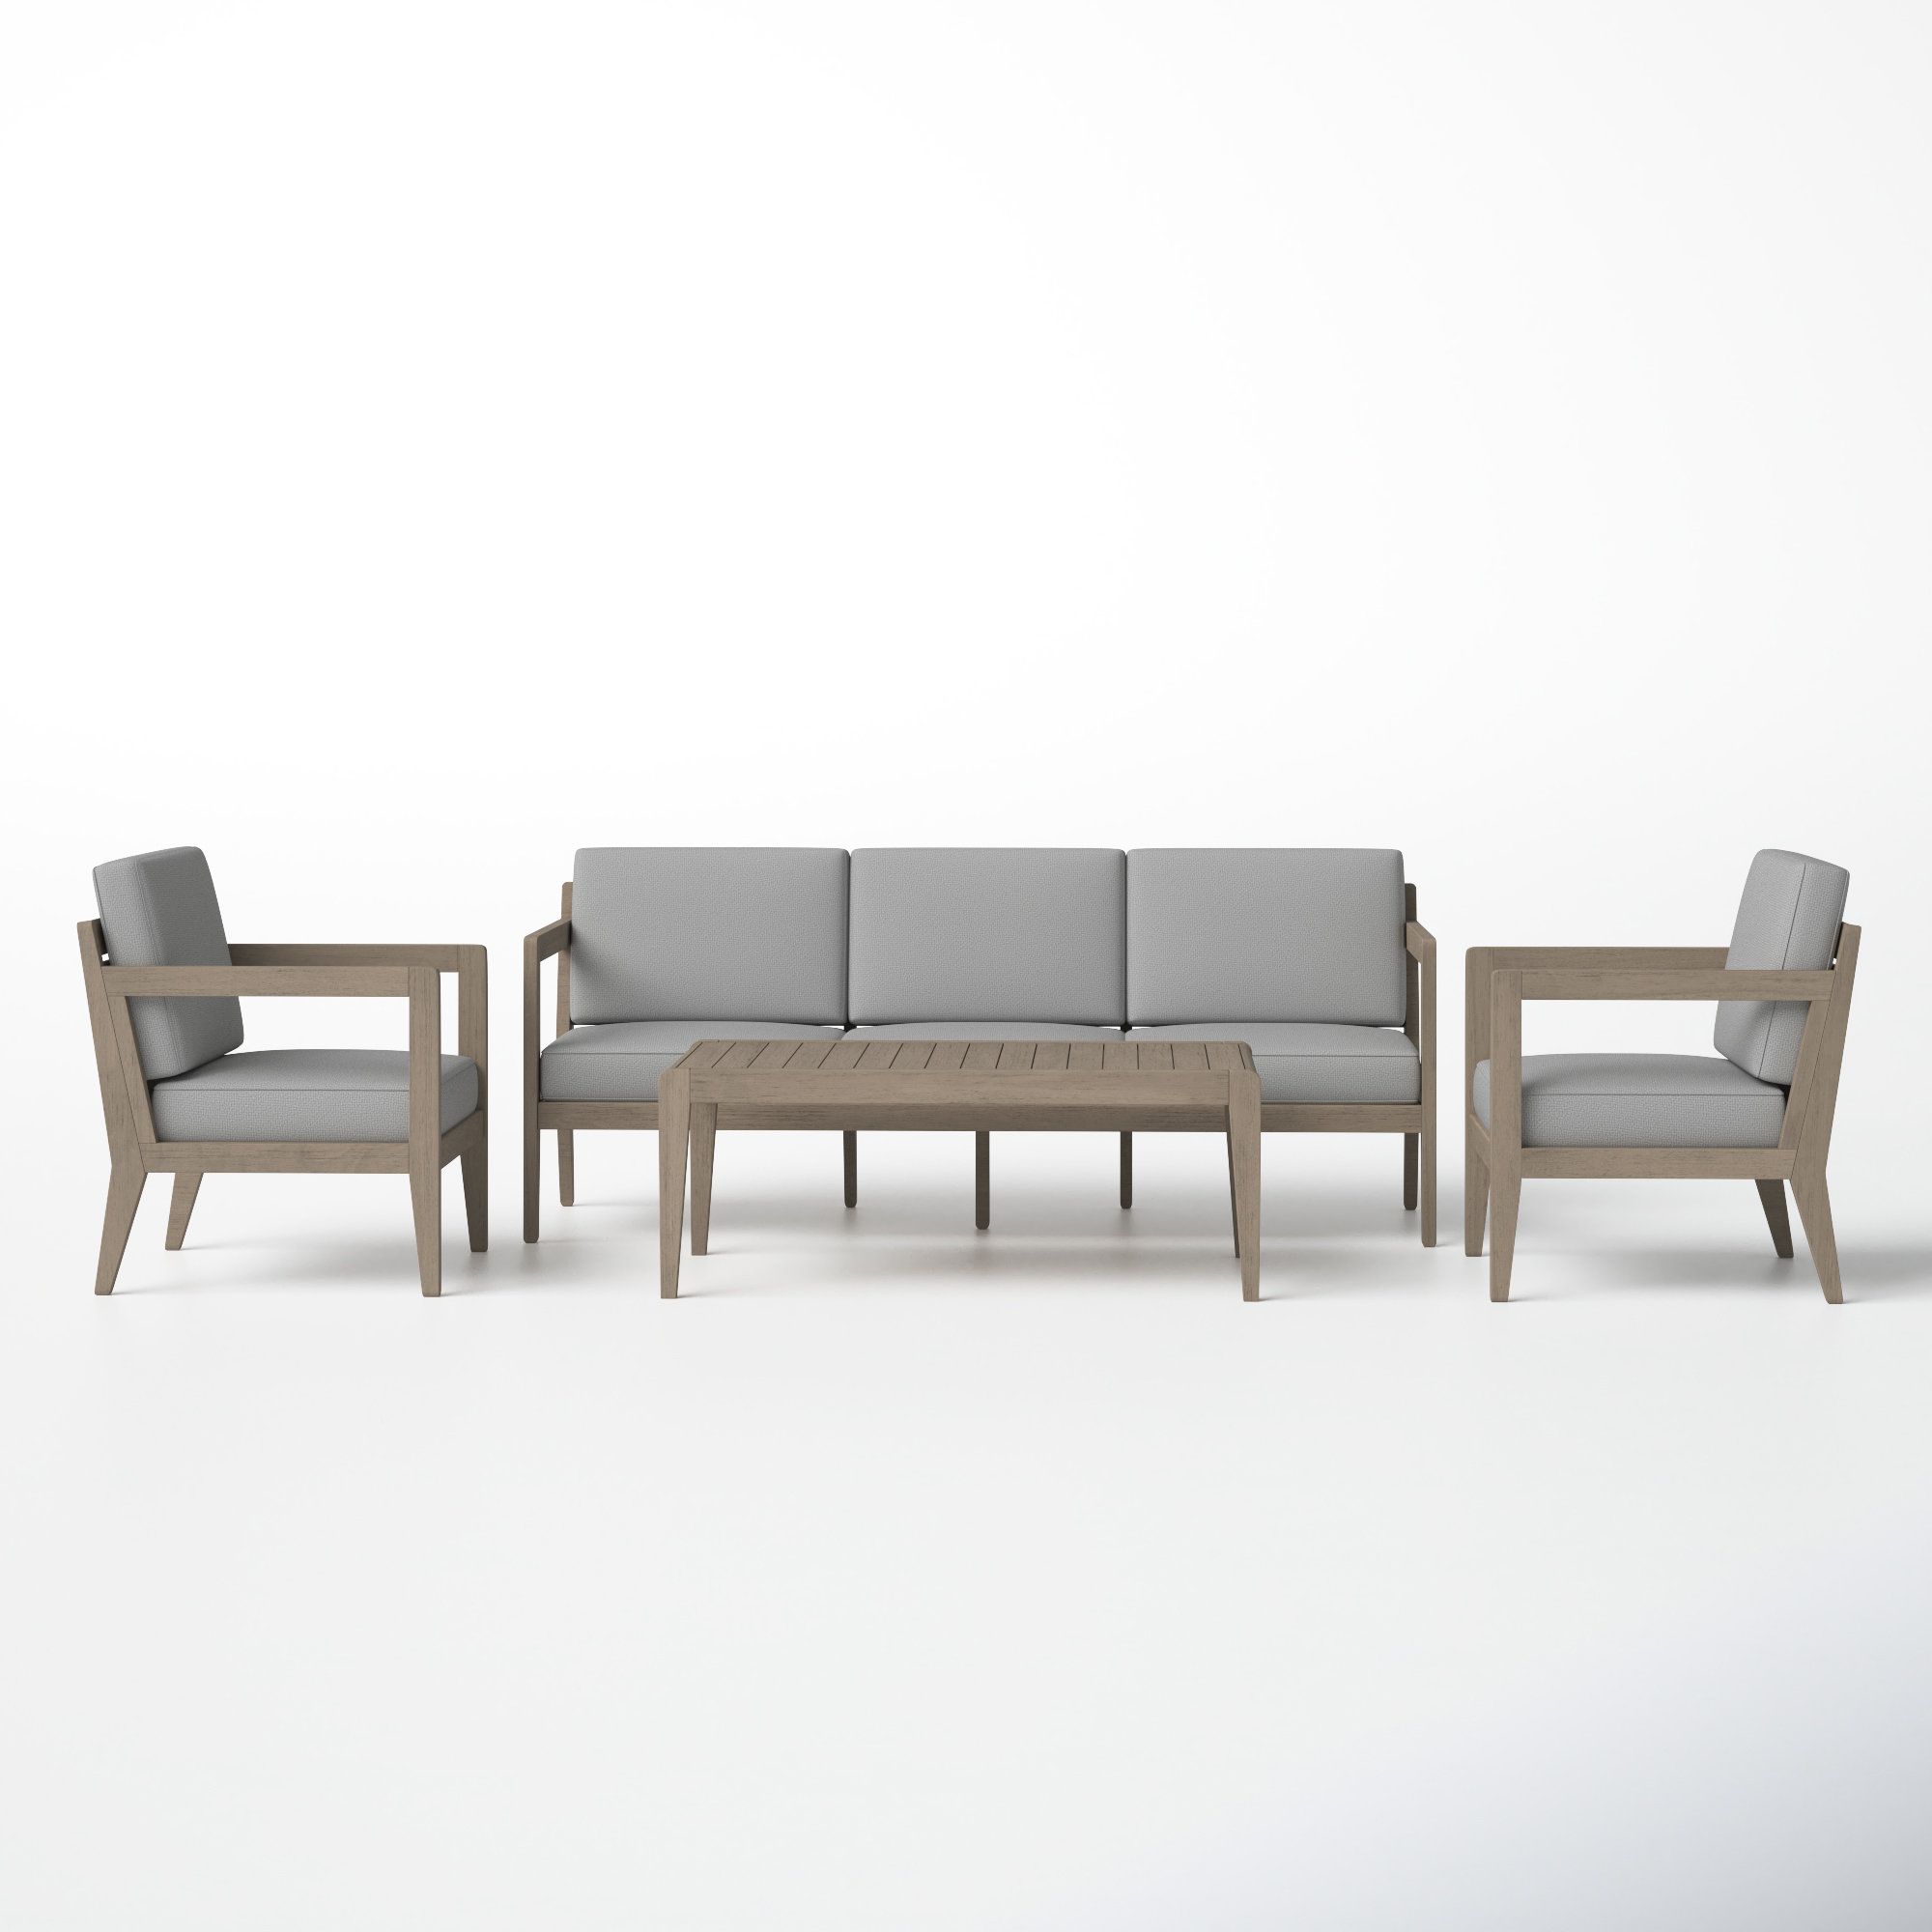 Ojai 4 Piece Outdoor Set, With Sofa, Coffee Table, And 2 Lounge Chairs &  Reviews (View 9 of 15)